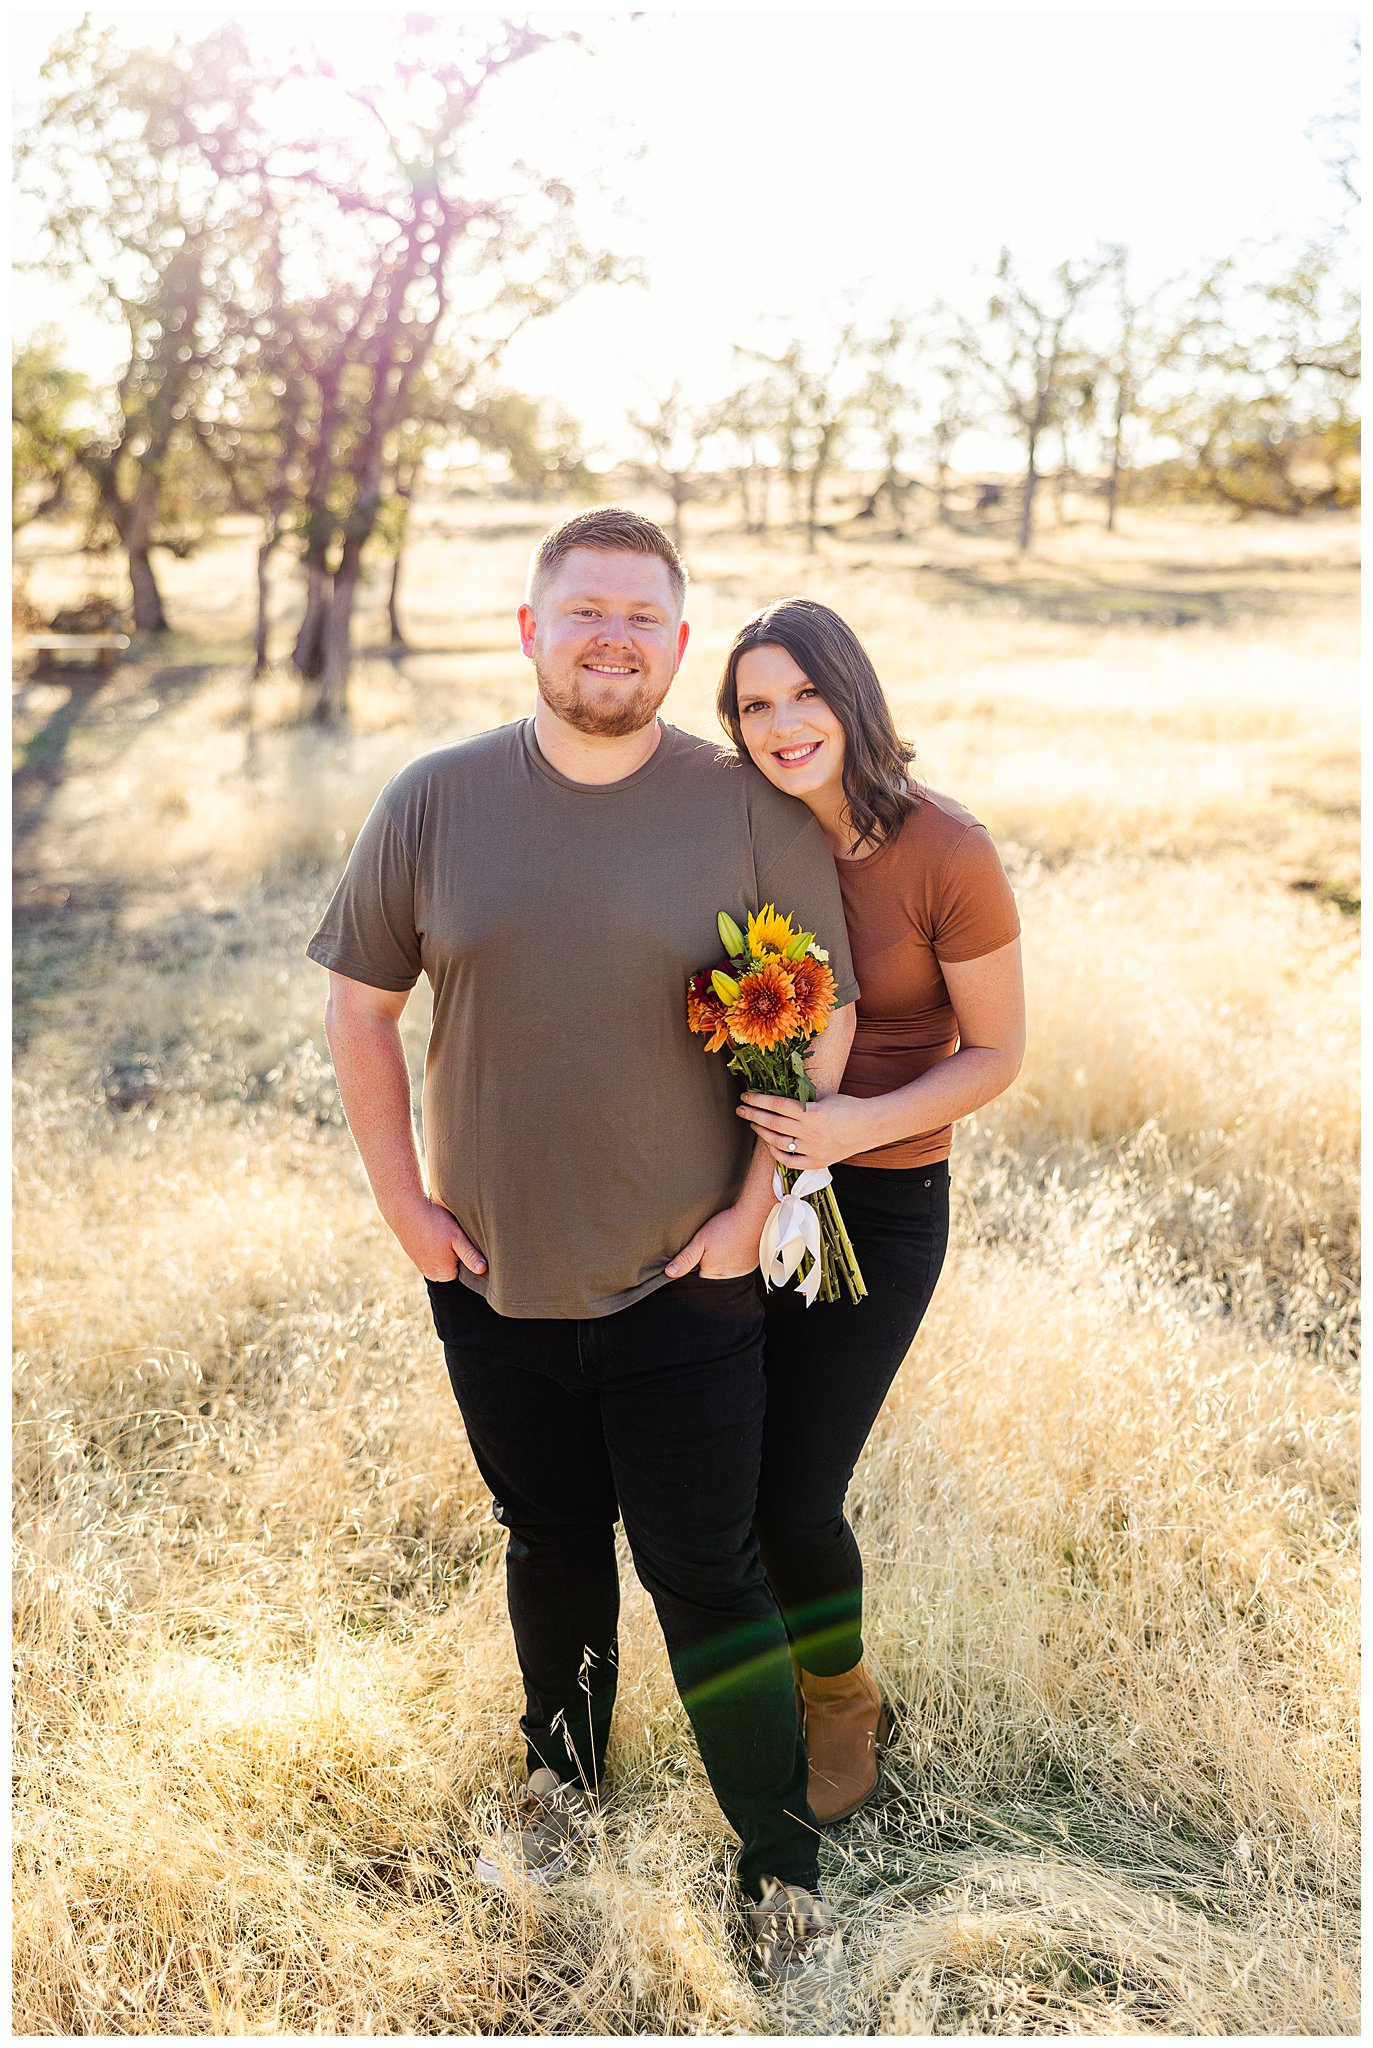 Fall Engagement Session at Peregrine Post Disc Golf Course | Meagan + Andrew